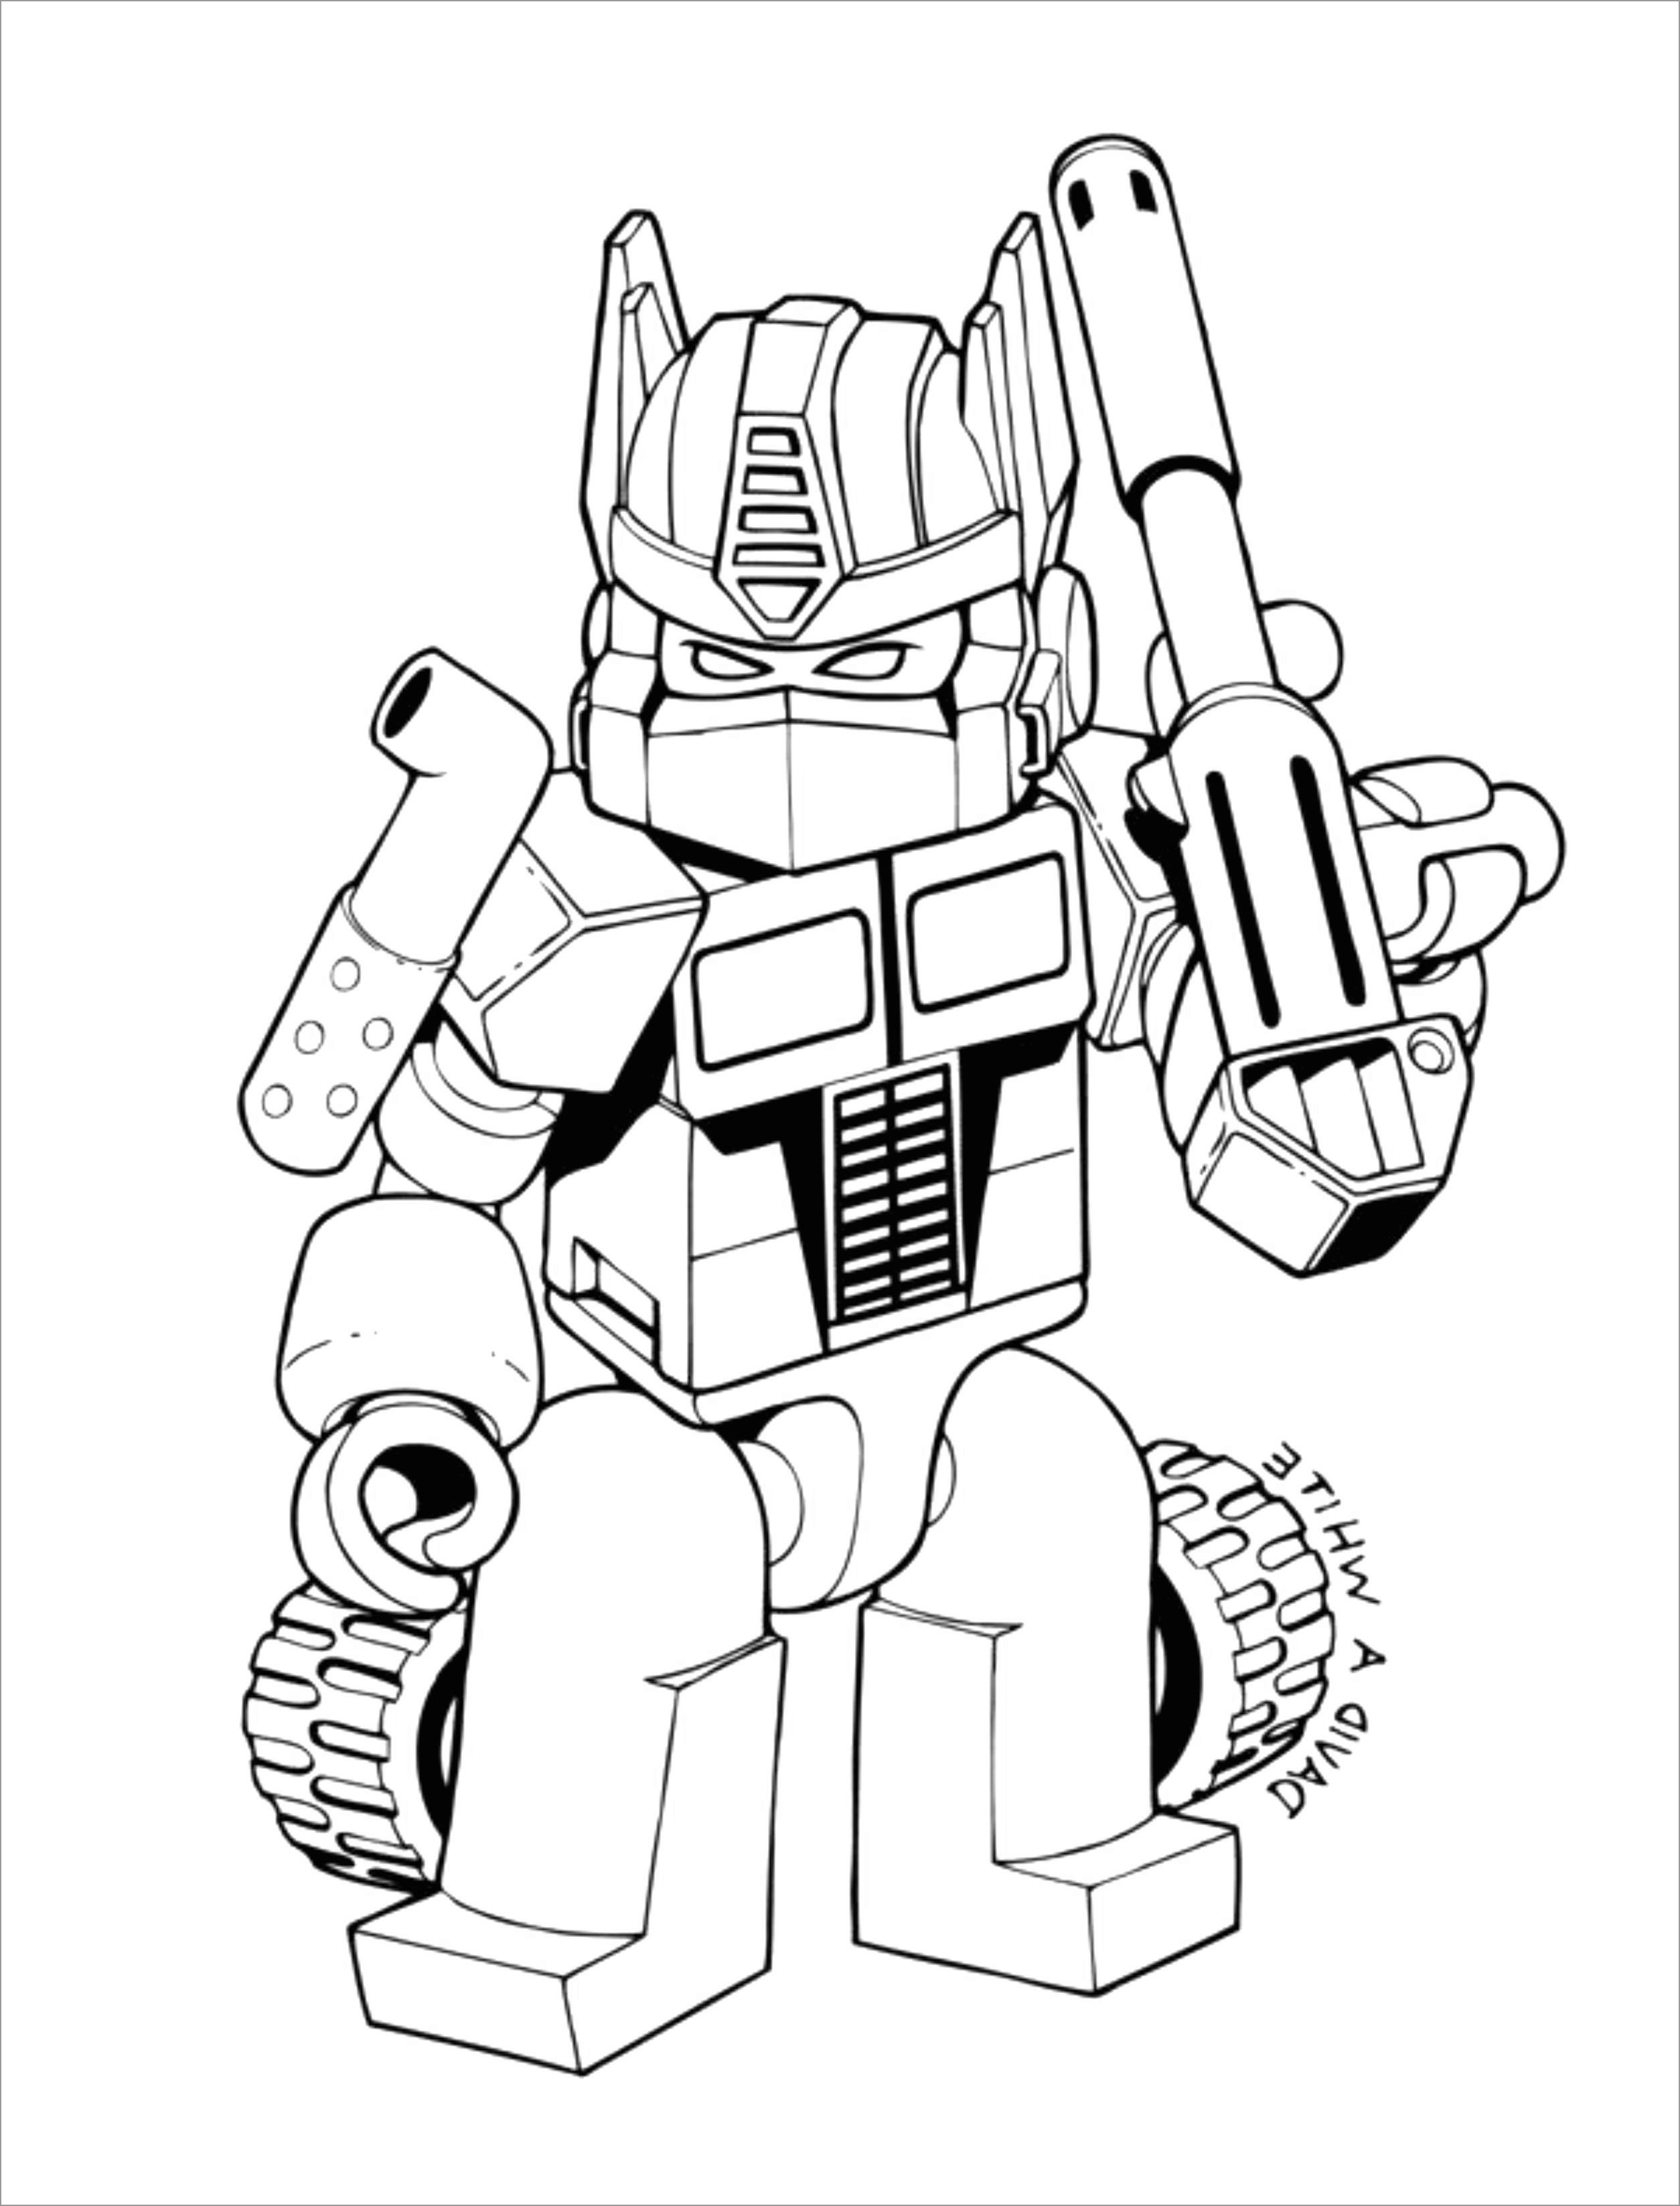 Lego Transformer Coloring Pages